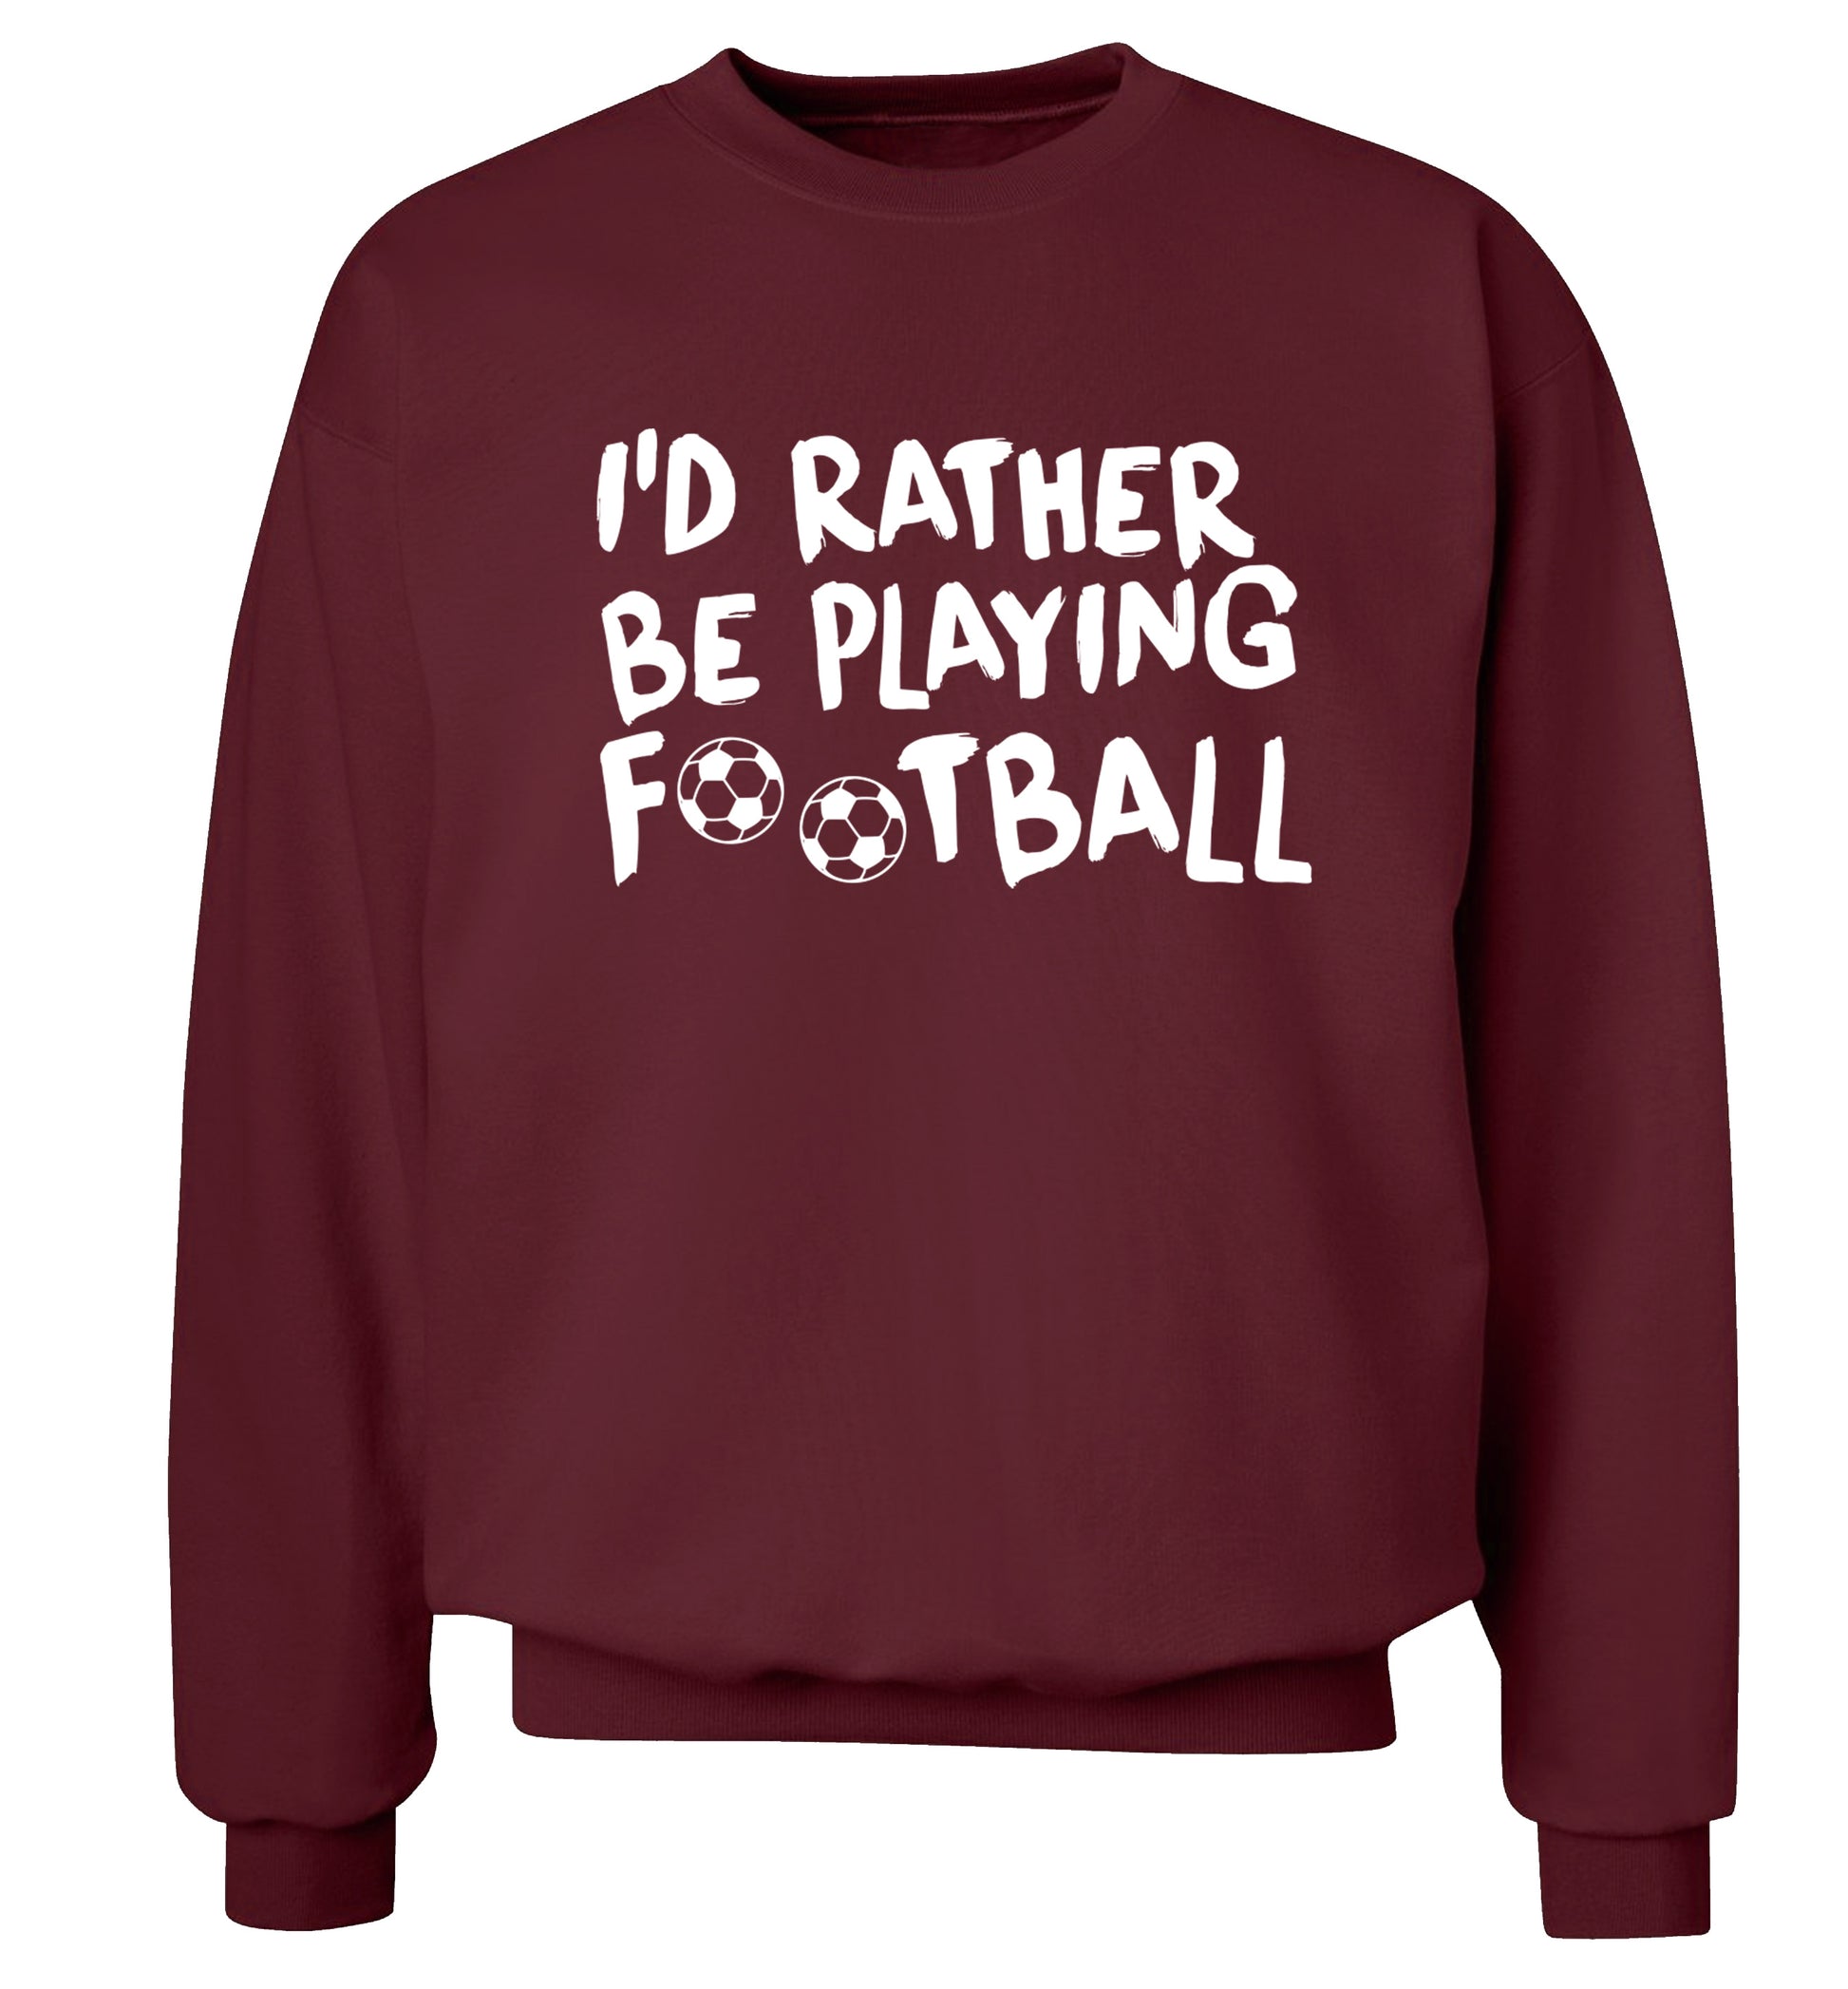 I'd rather be playing football Adult's unisexmaroon Sweater 2XL